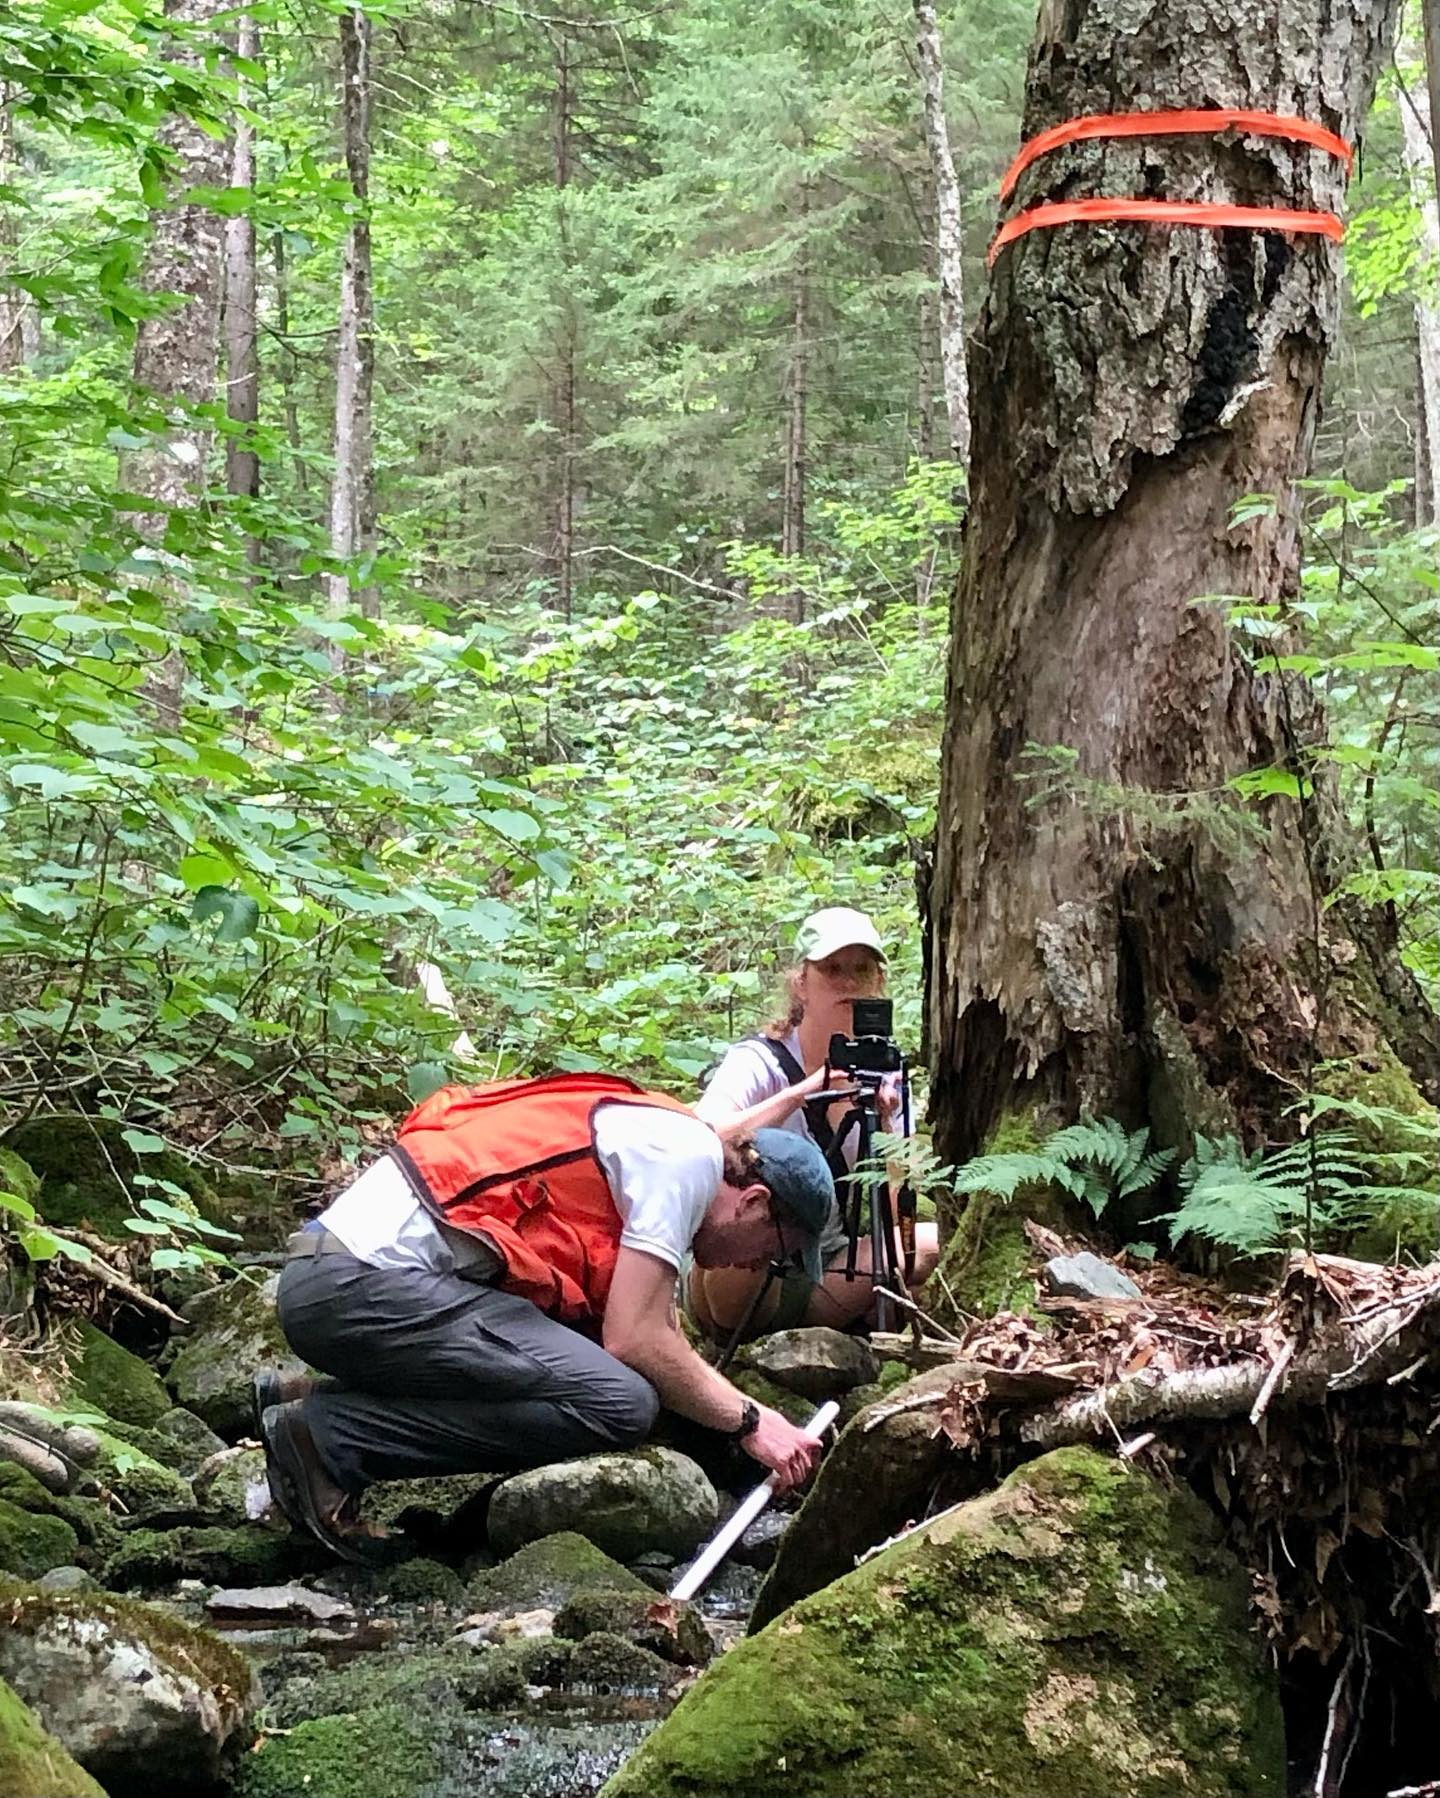 Two researchers in forest kneeling by tree